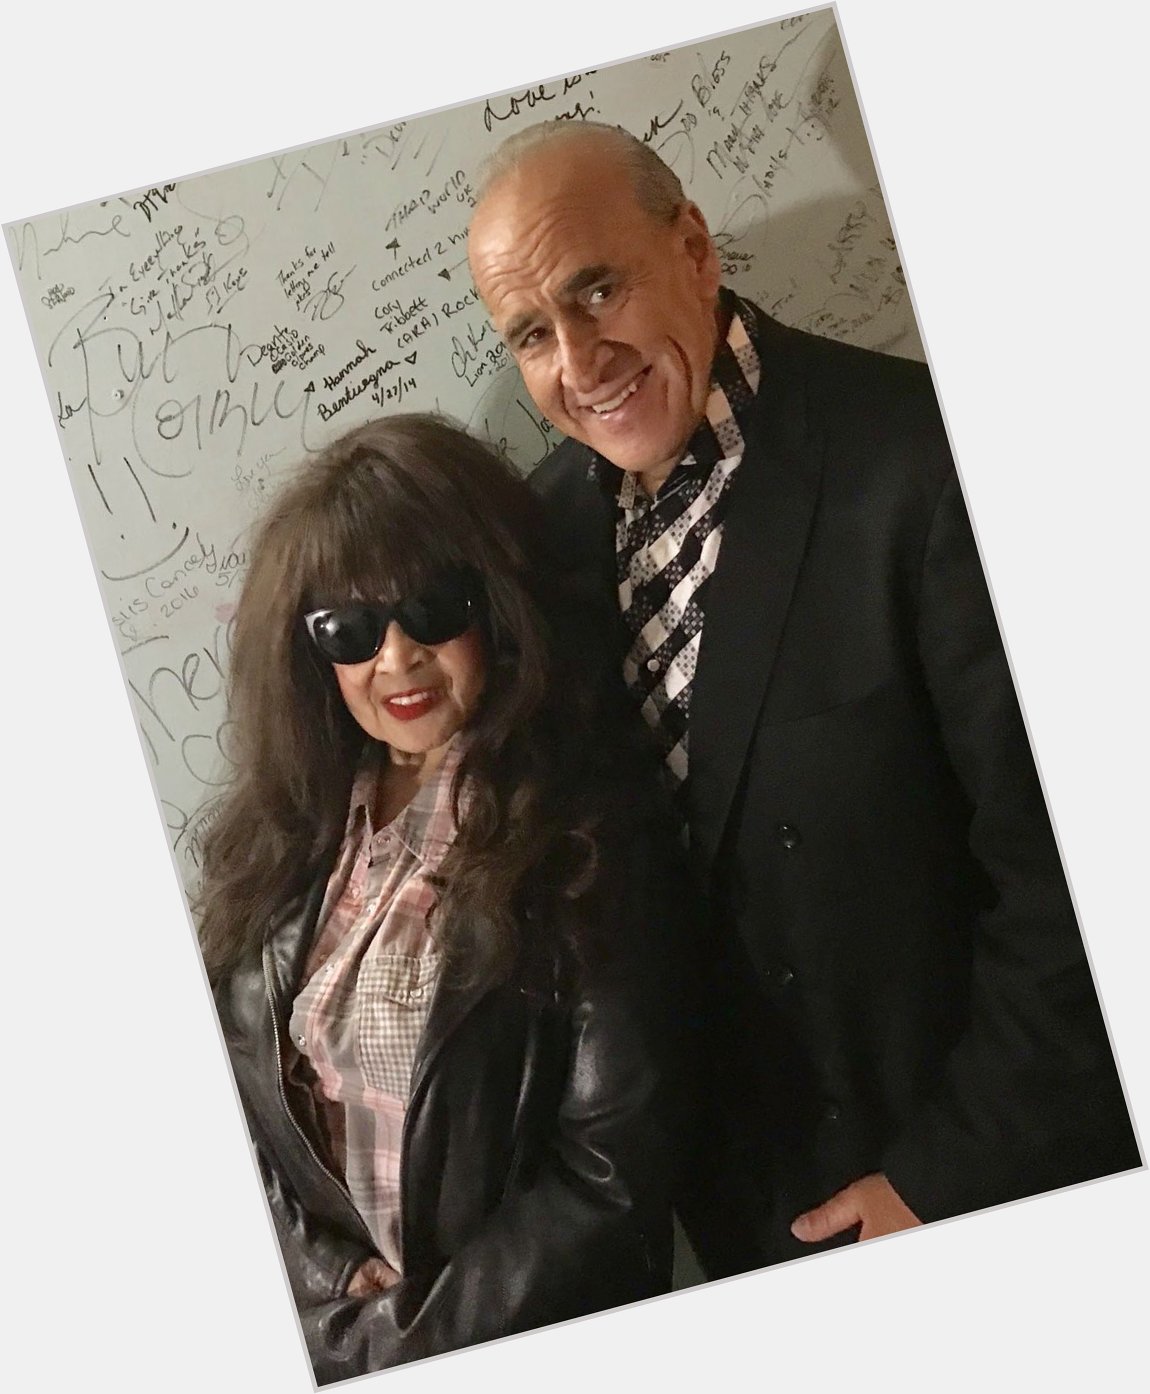 Happy Birthday to the legendary Ronnie Spector who turns 77 today!  